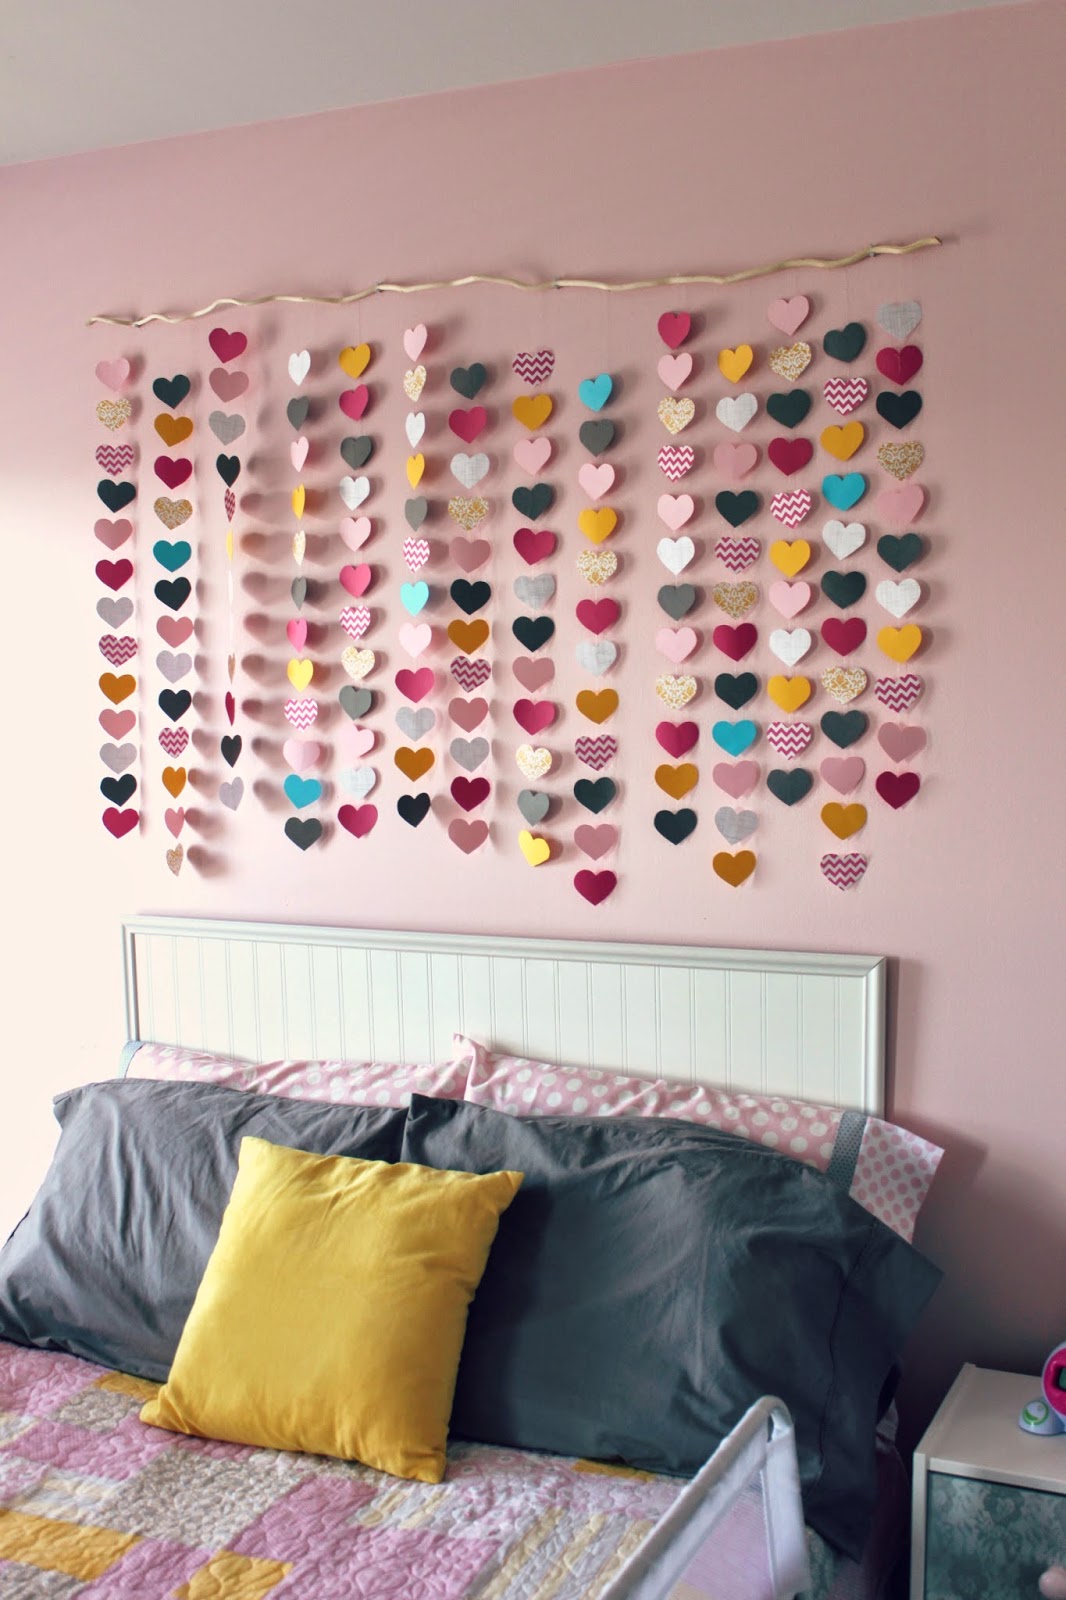 Preppy Wall Decor Ideas | DIY for your Room or Dorm | Daily Dose of Charm